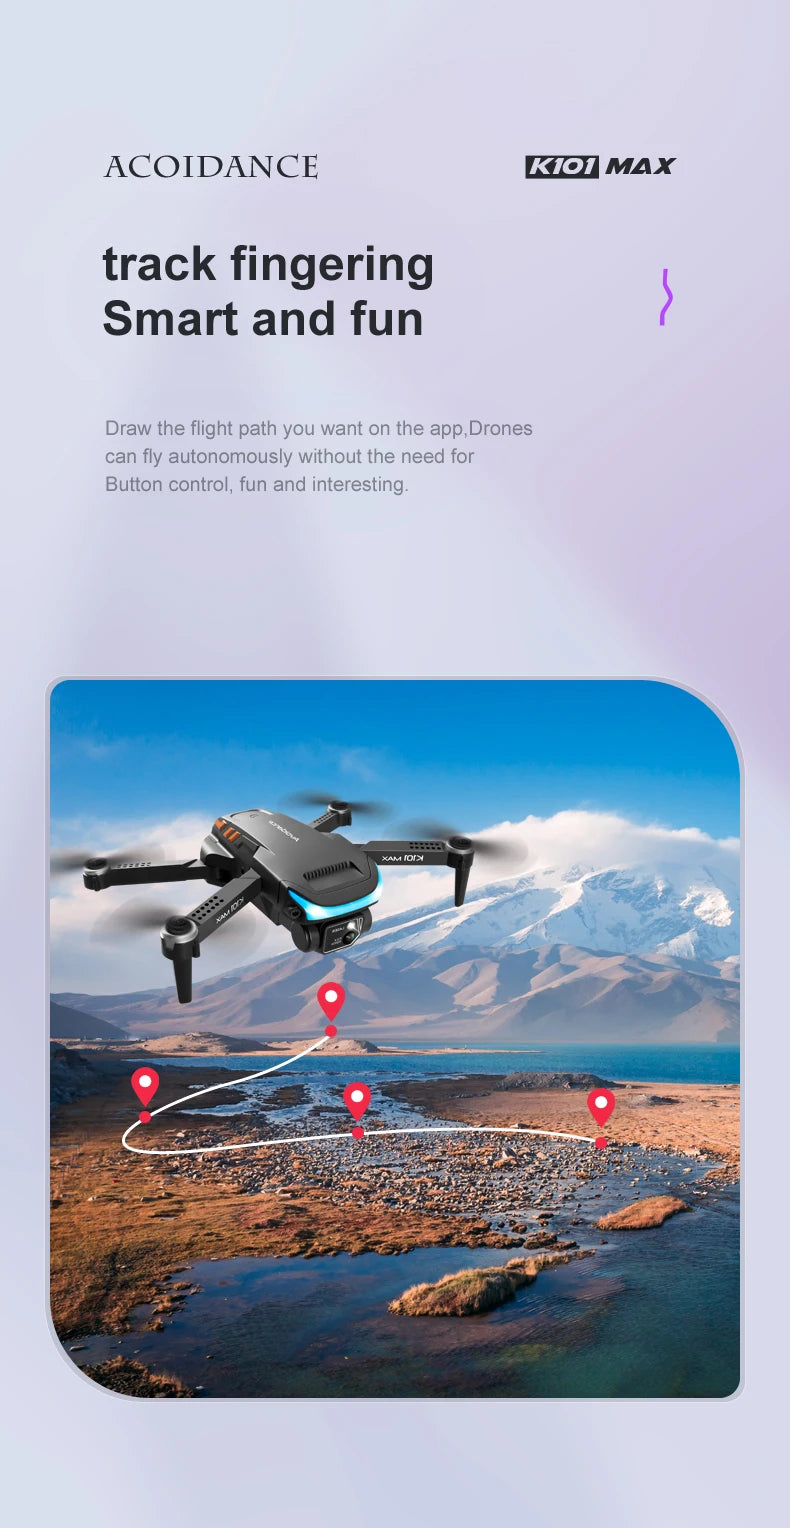 K101 Max Drone, drones can fly autonomously without the need for button control .